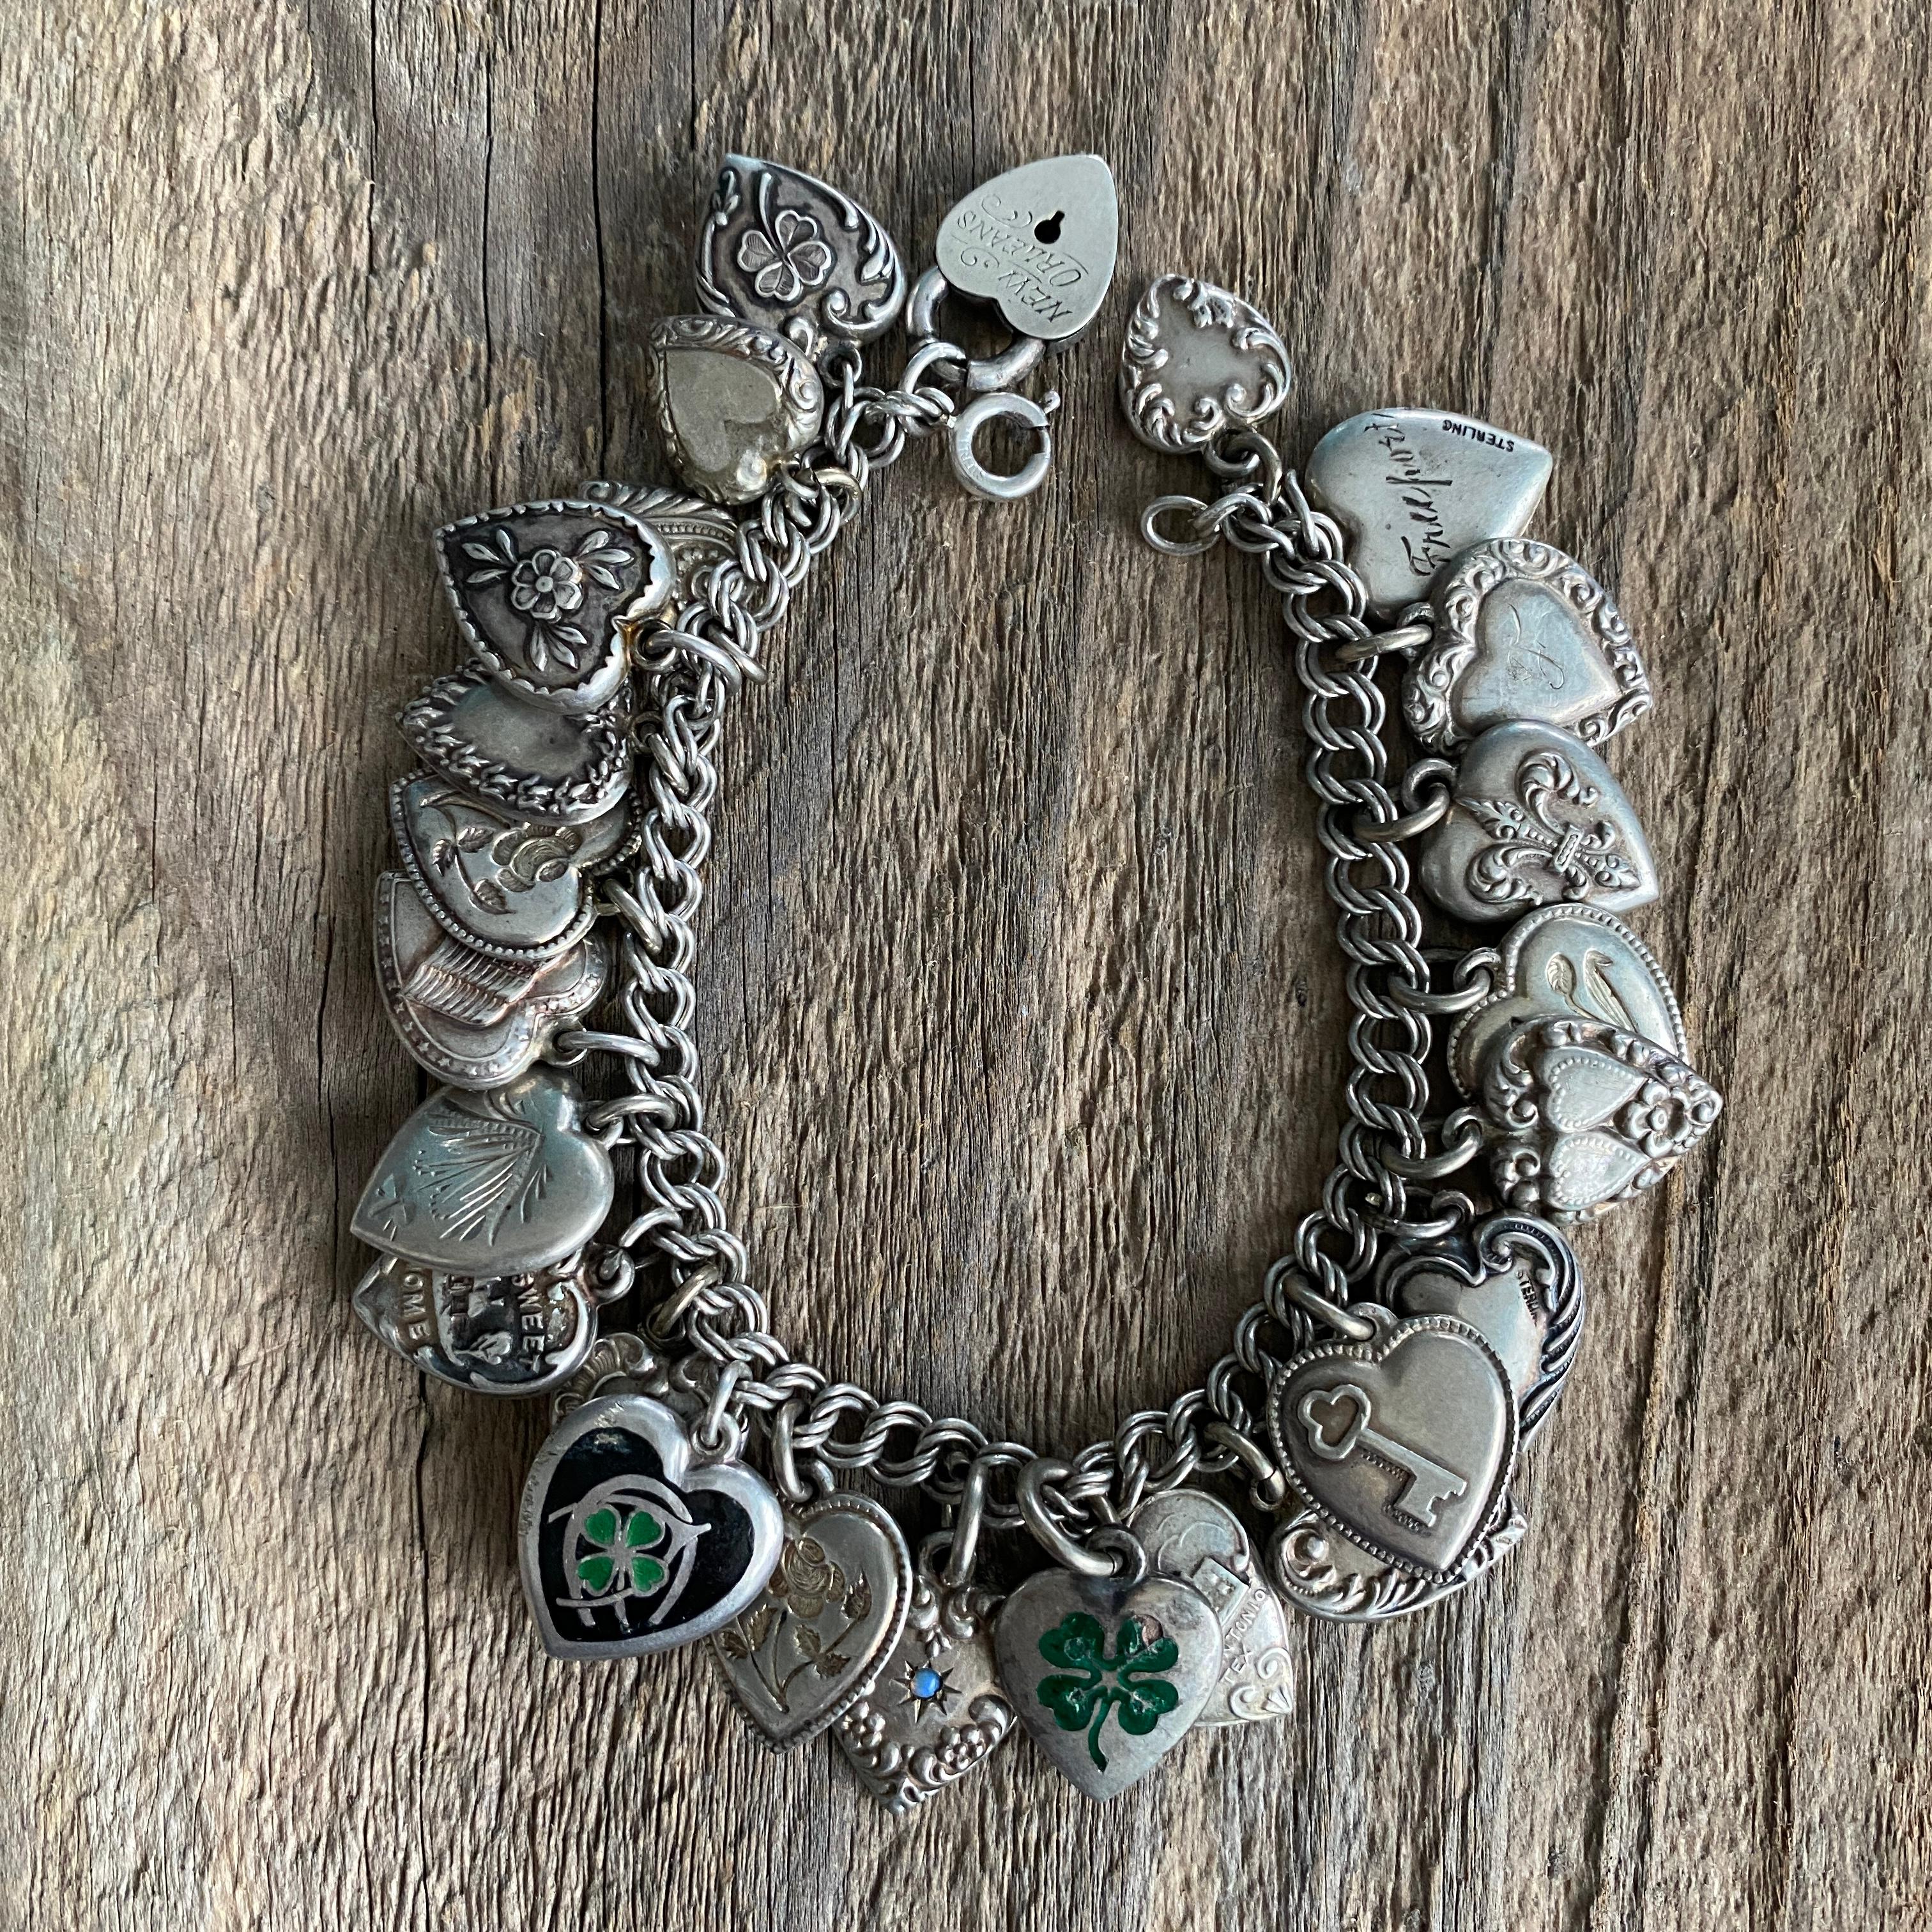 Details:
Fantastic 1940's vintage charm bracelet with puffy heart charms. This bracelet has three sweet charms with a four leaf clover theme. Super cute, good luck bracelet. Great collection of mostly two sided puffy hearts, one with a design, and